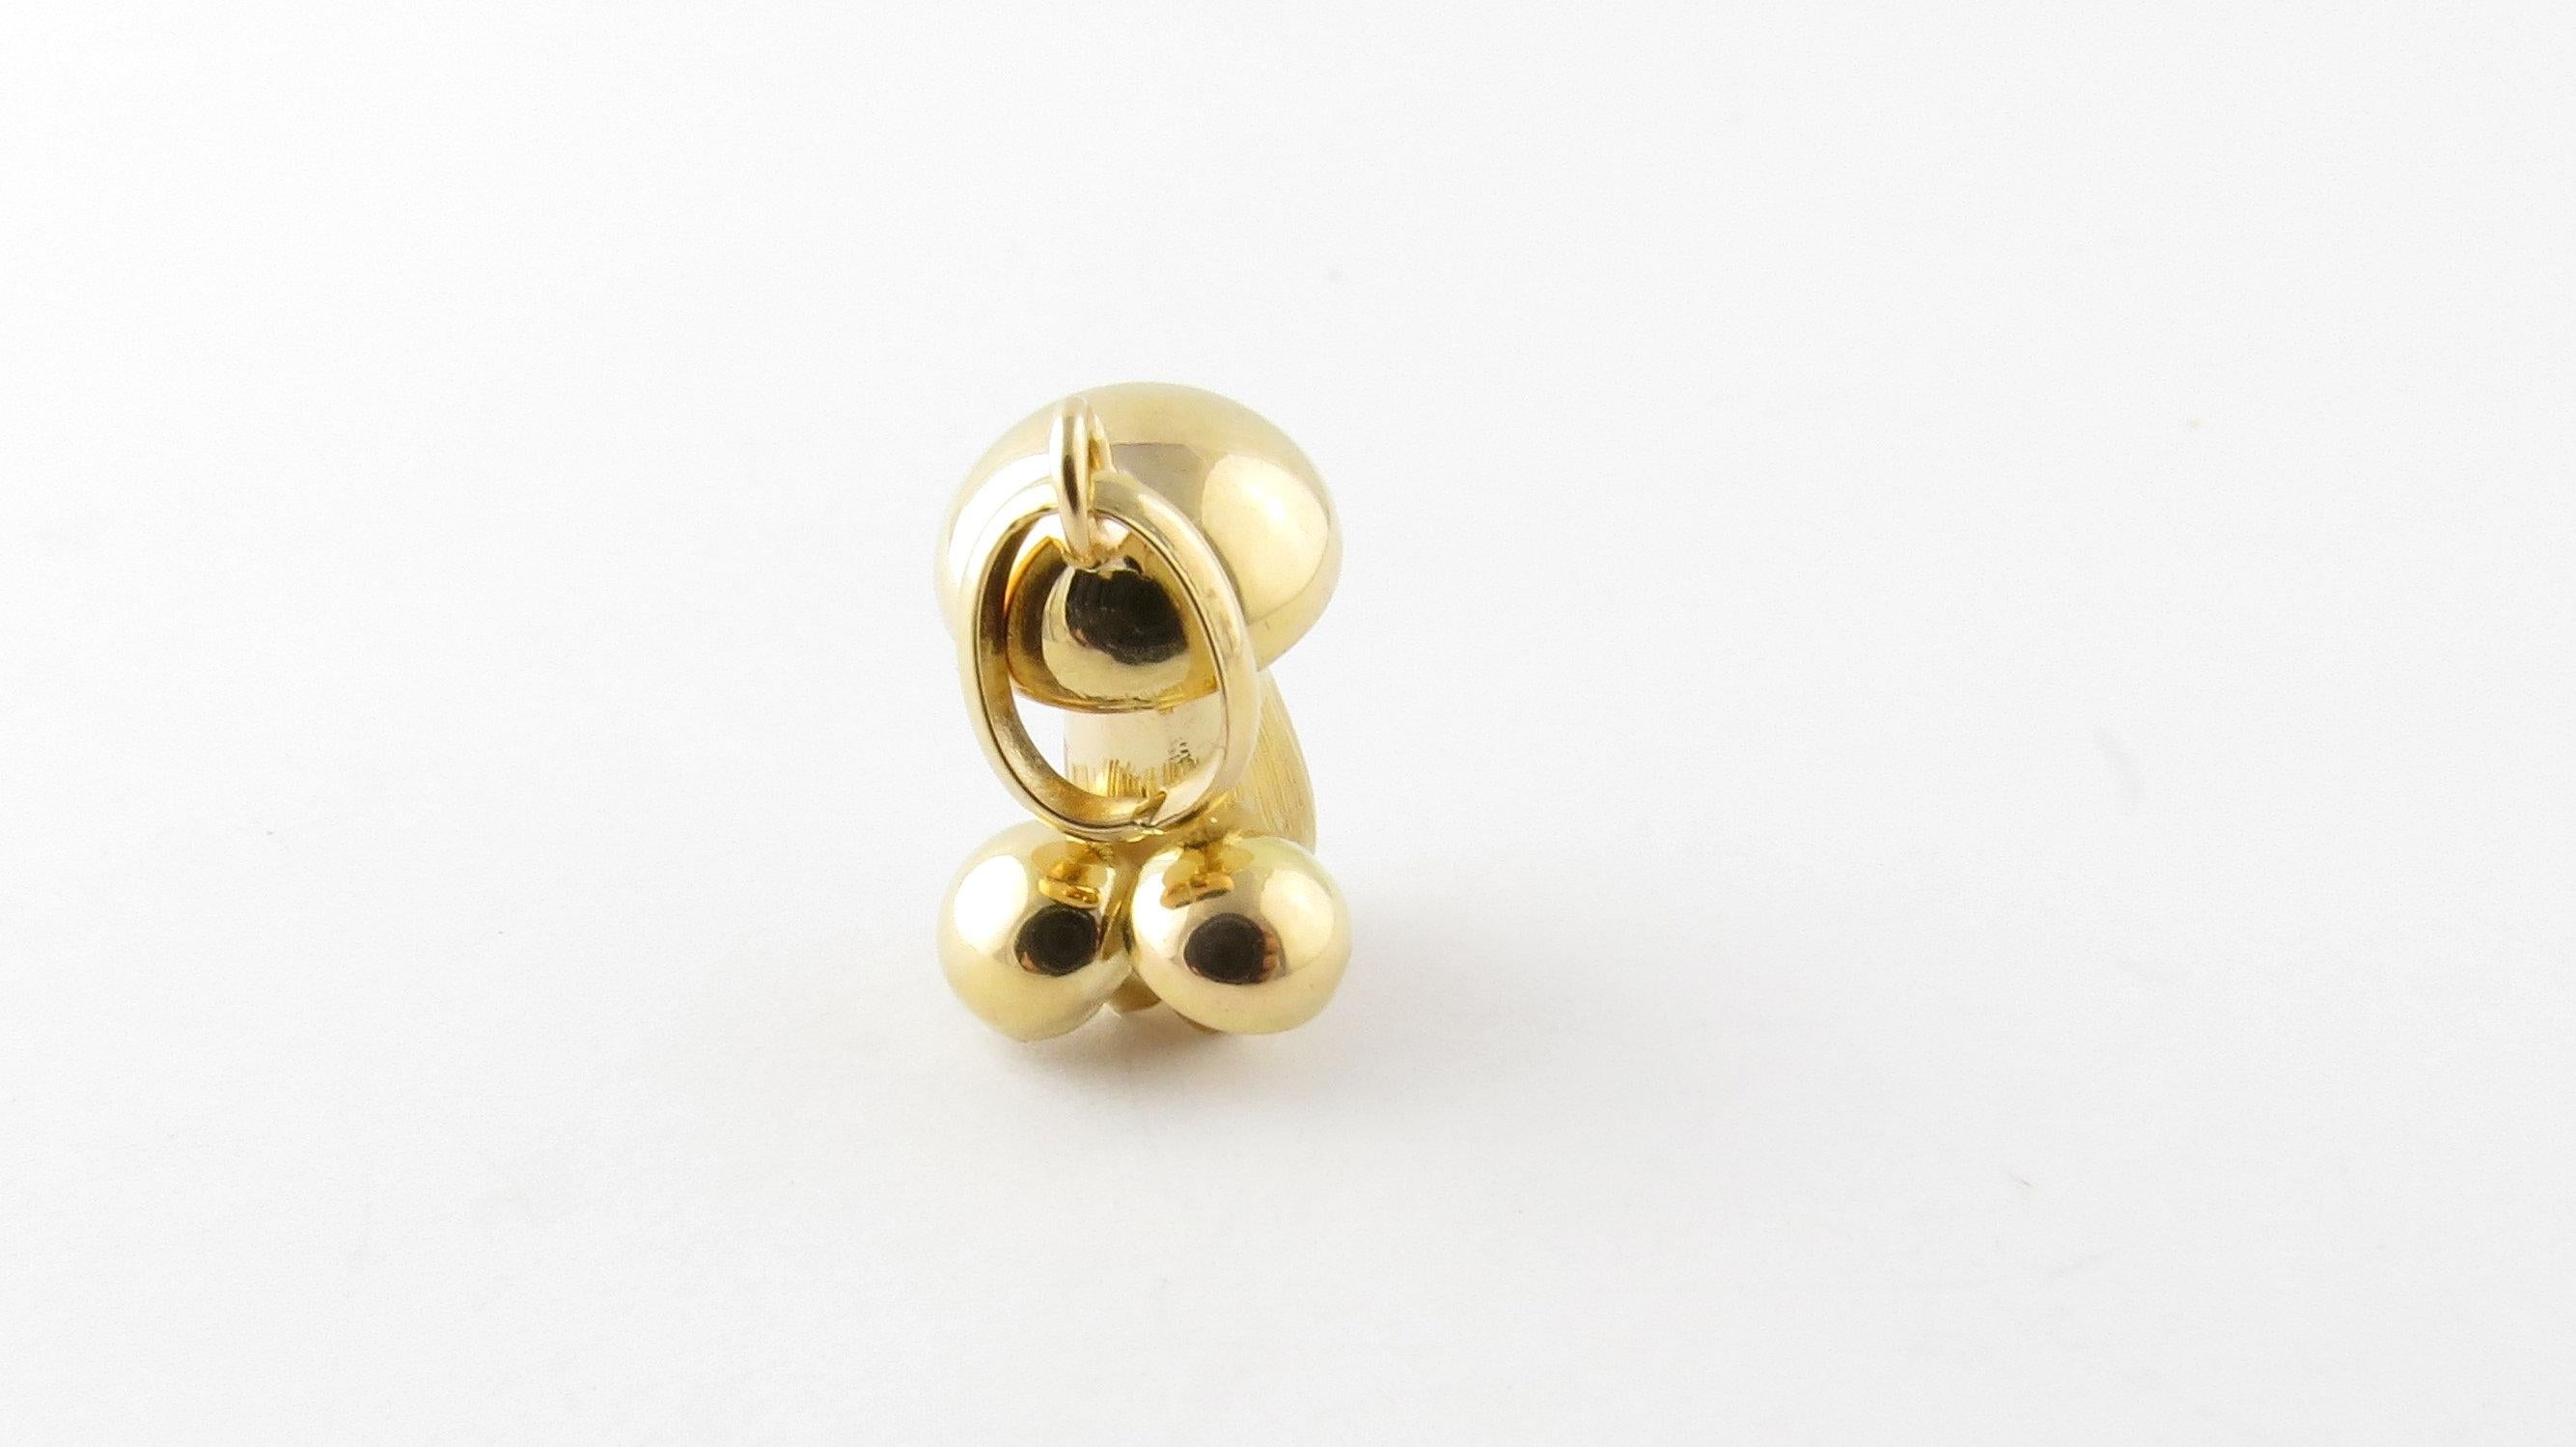 Vintage 18 Karat Yellow Gold Mushrooms Charm- 
This lovely 3D charm features three miniature mushrooms meticulously detailed in 18K yellow gold. 
Size: 16 mm x 14 mm (actual charm) 
Weight: 1.4 dwt. / 2.3 gr. 
Hallmark: Acid tested for 18K gold.